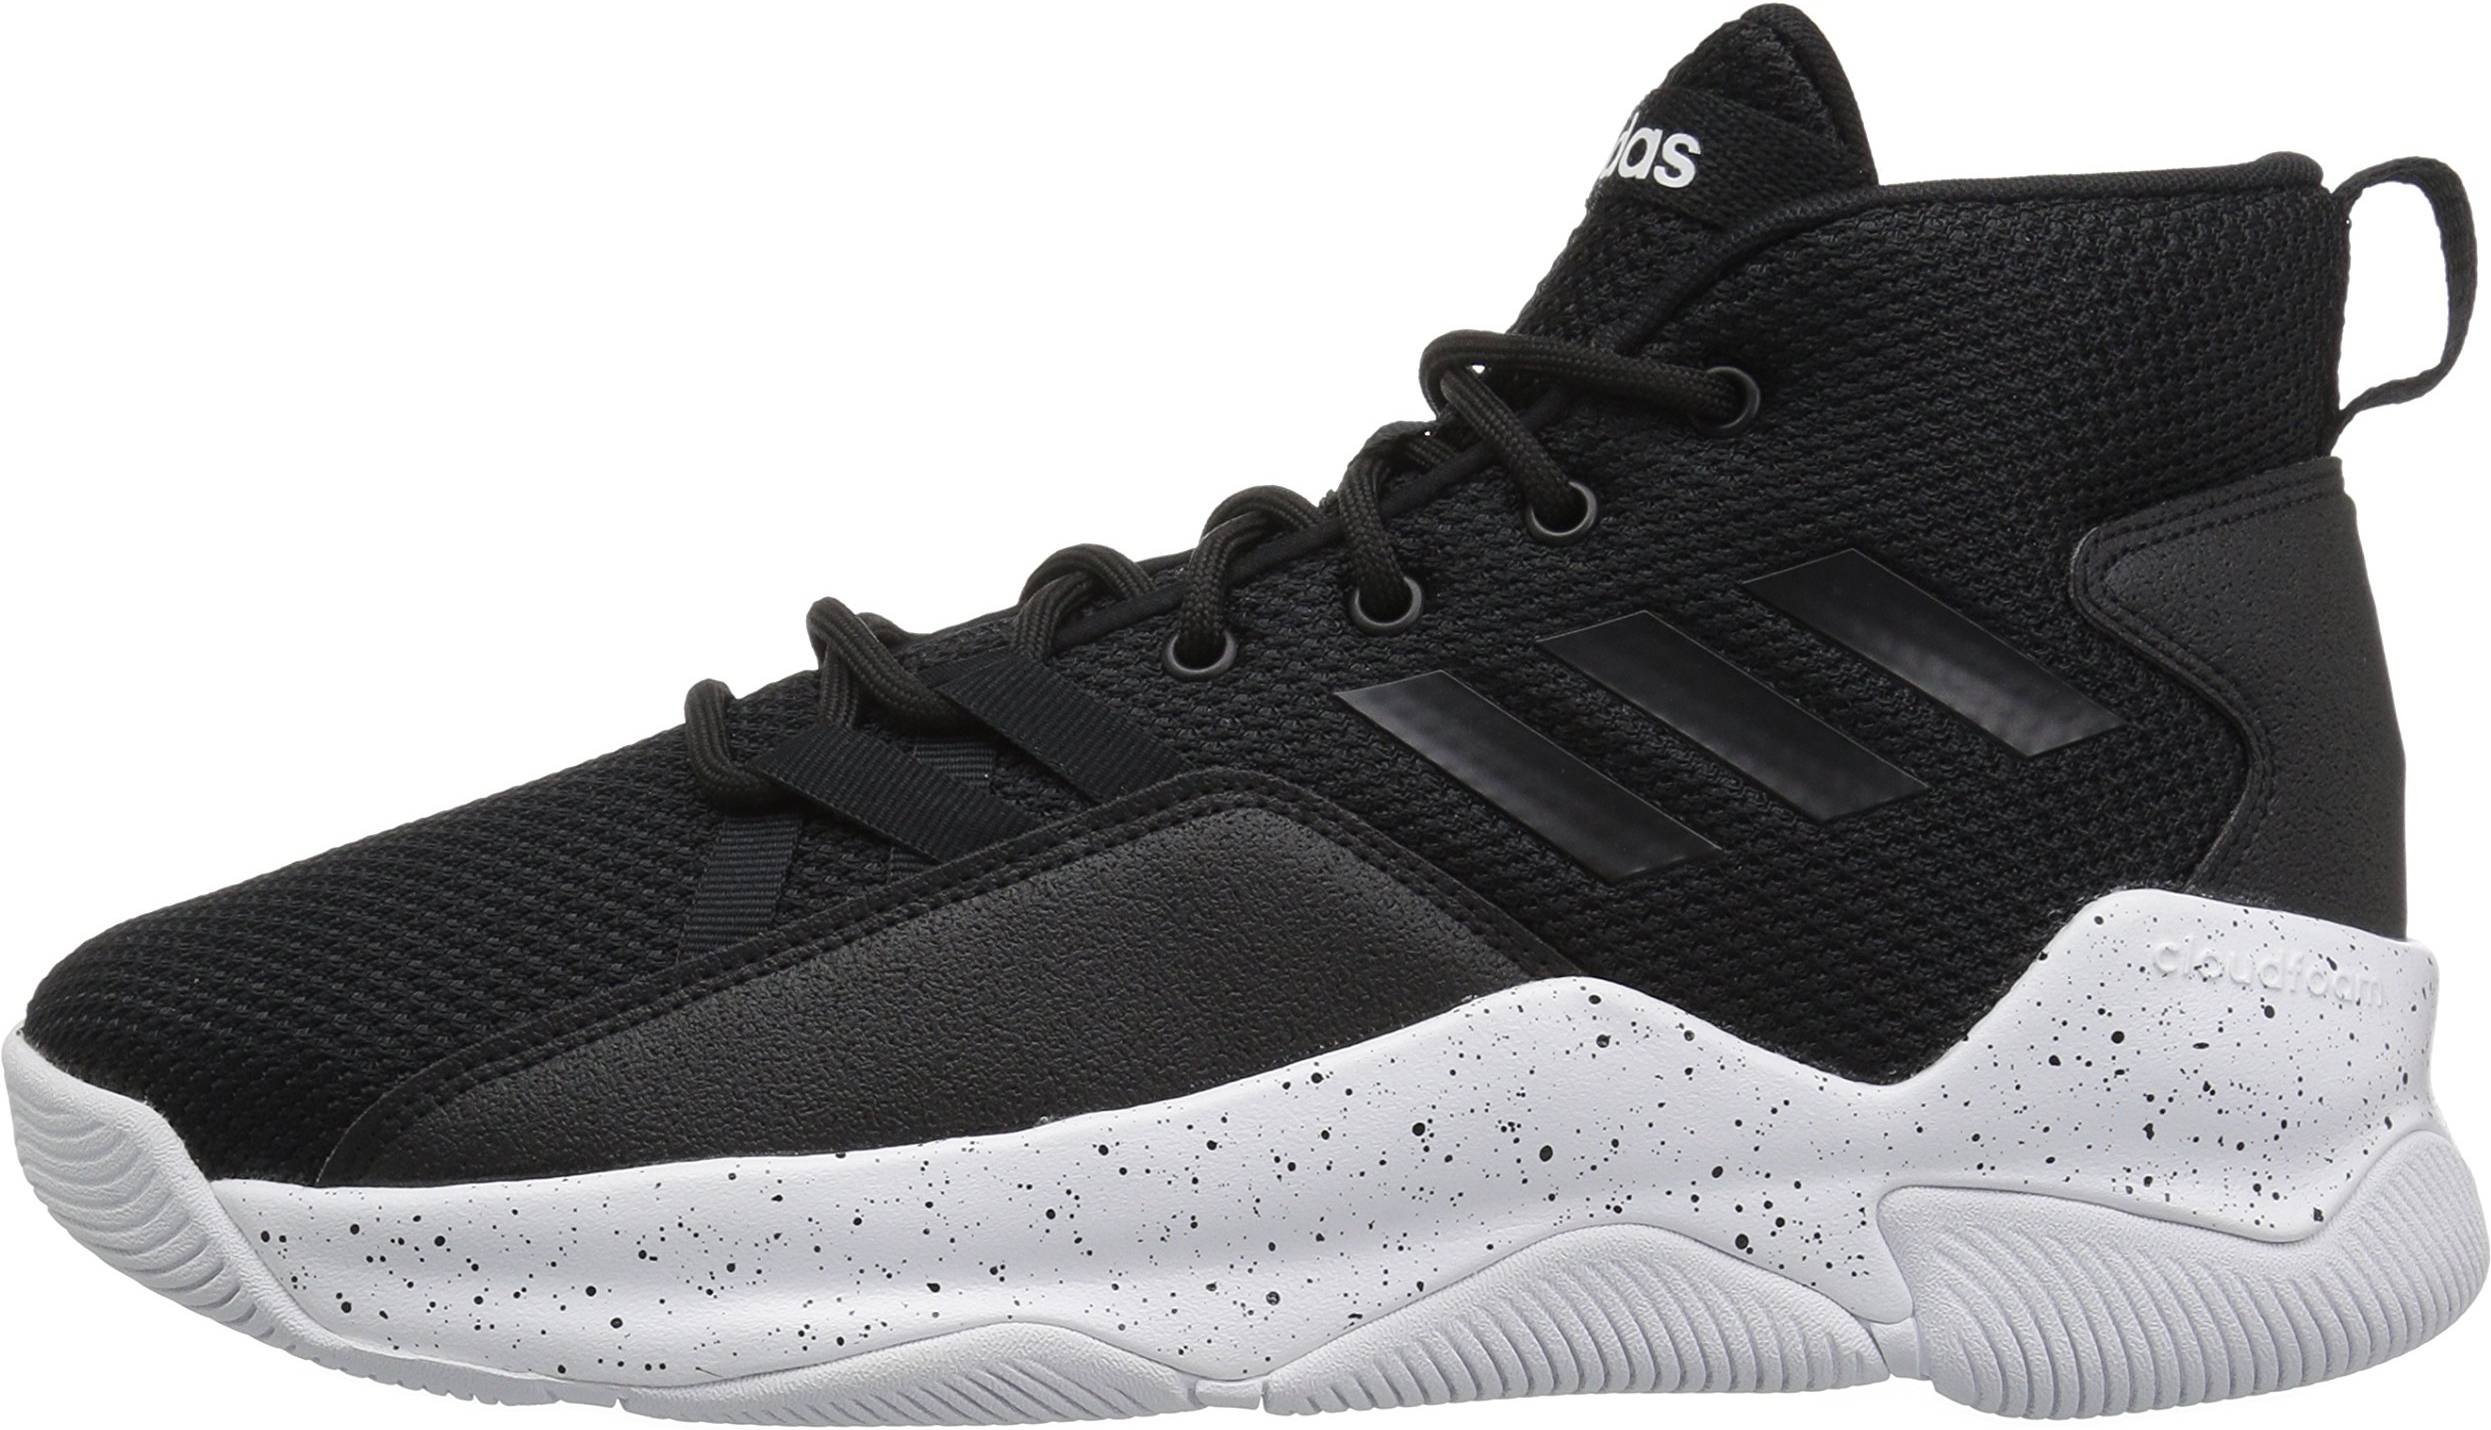 Adidas Streetfire - Deals ($70), Facts 